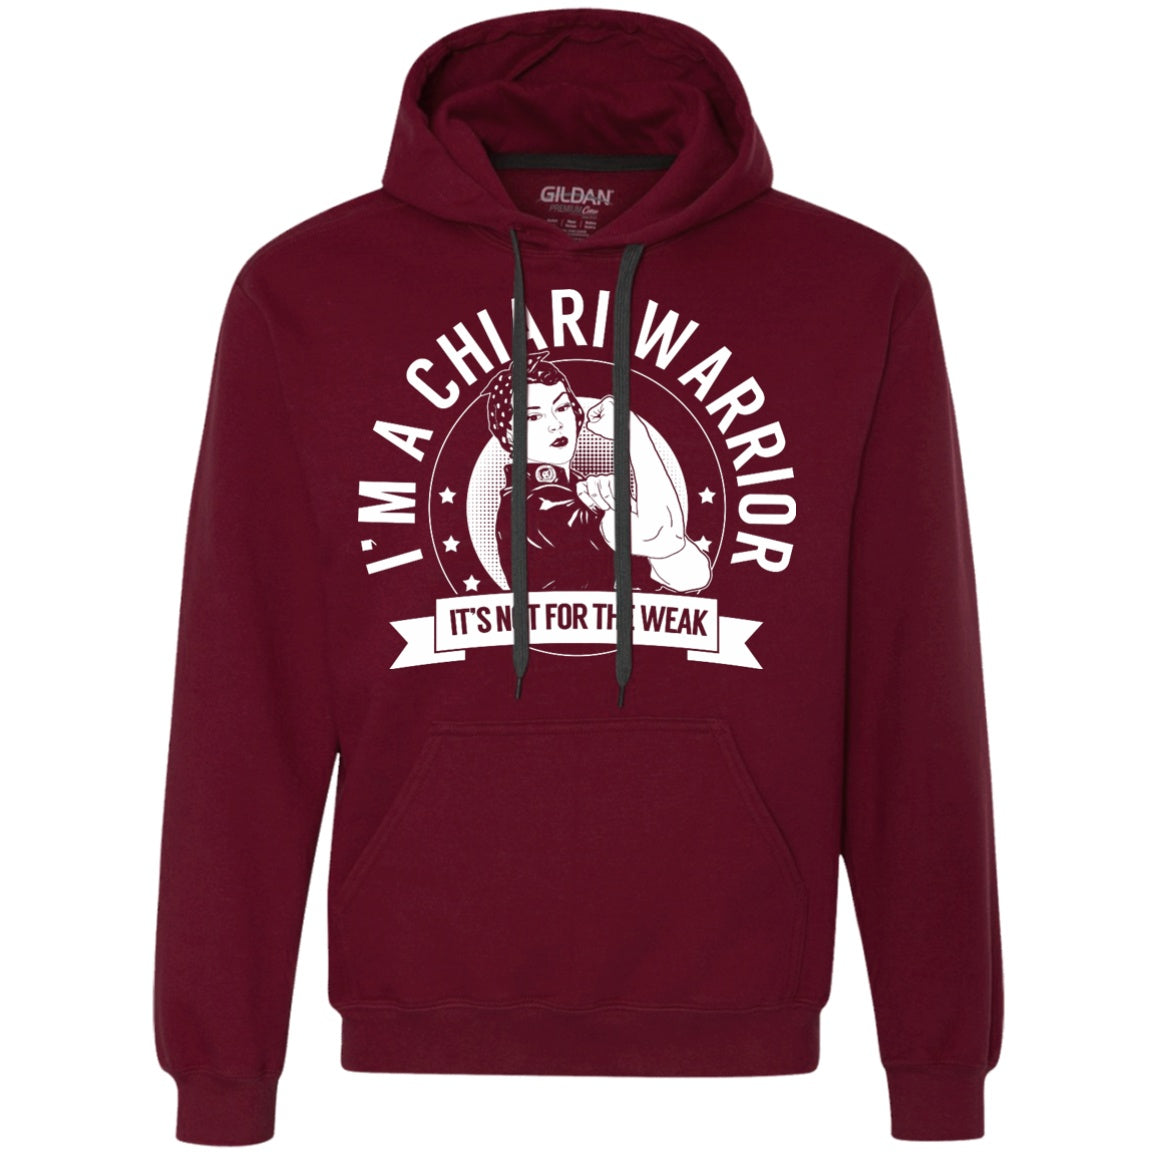 Chiari Warrior Not for the Weak Pullover Hoodie 9 oz. - The Unchargeables